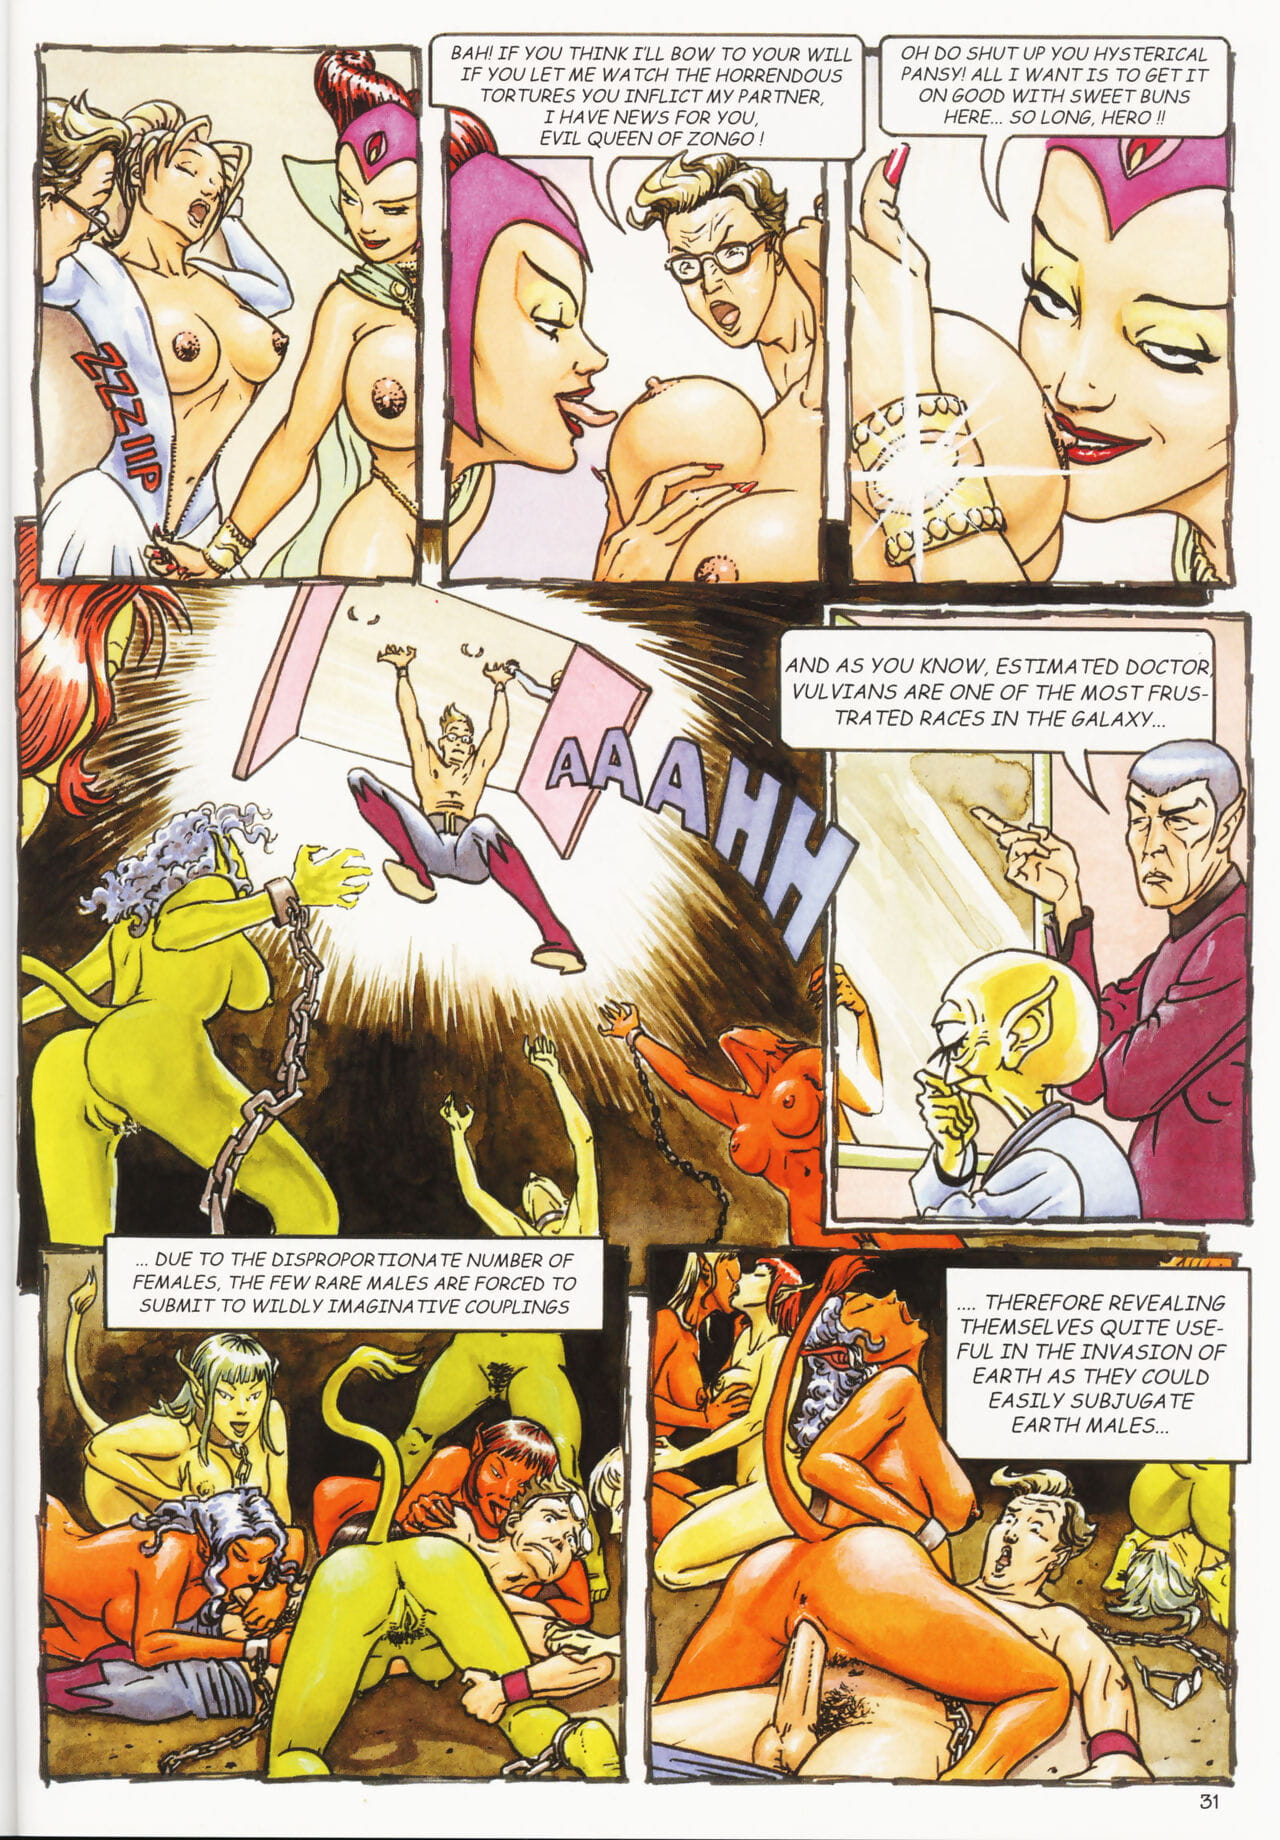 Sex Attack page 1